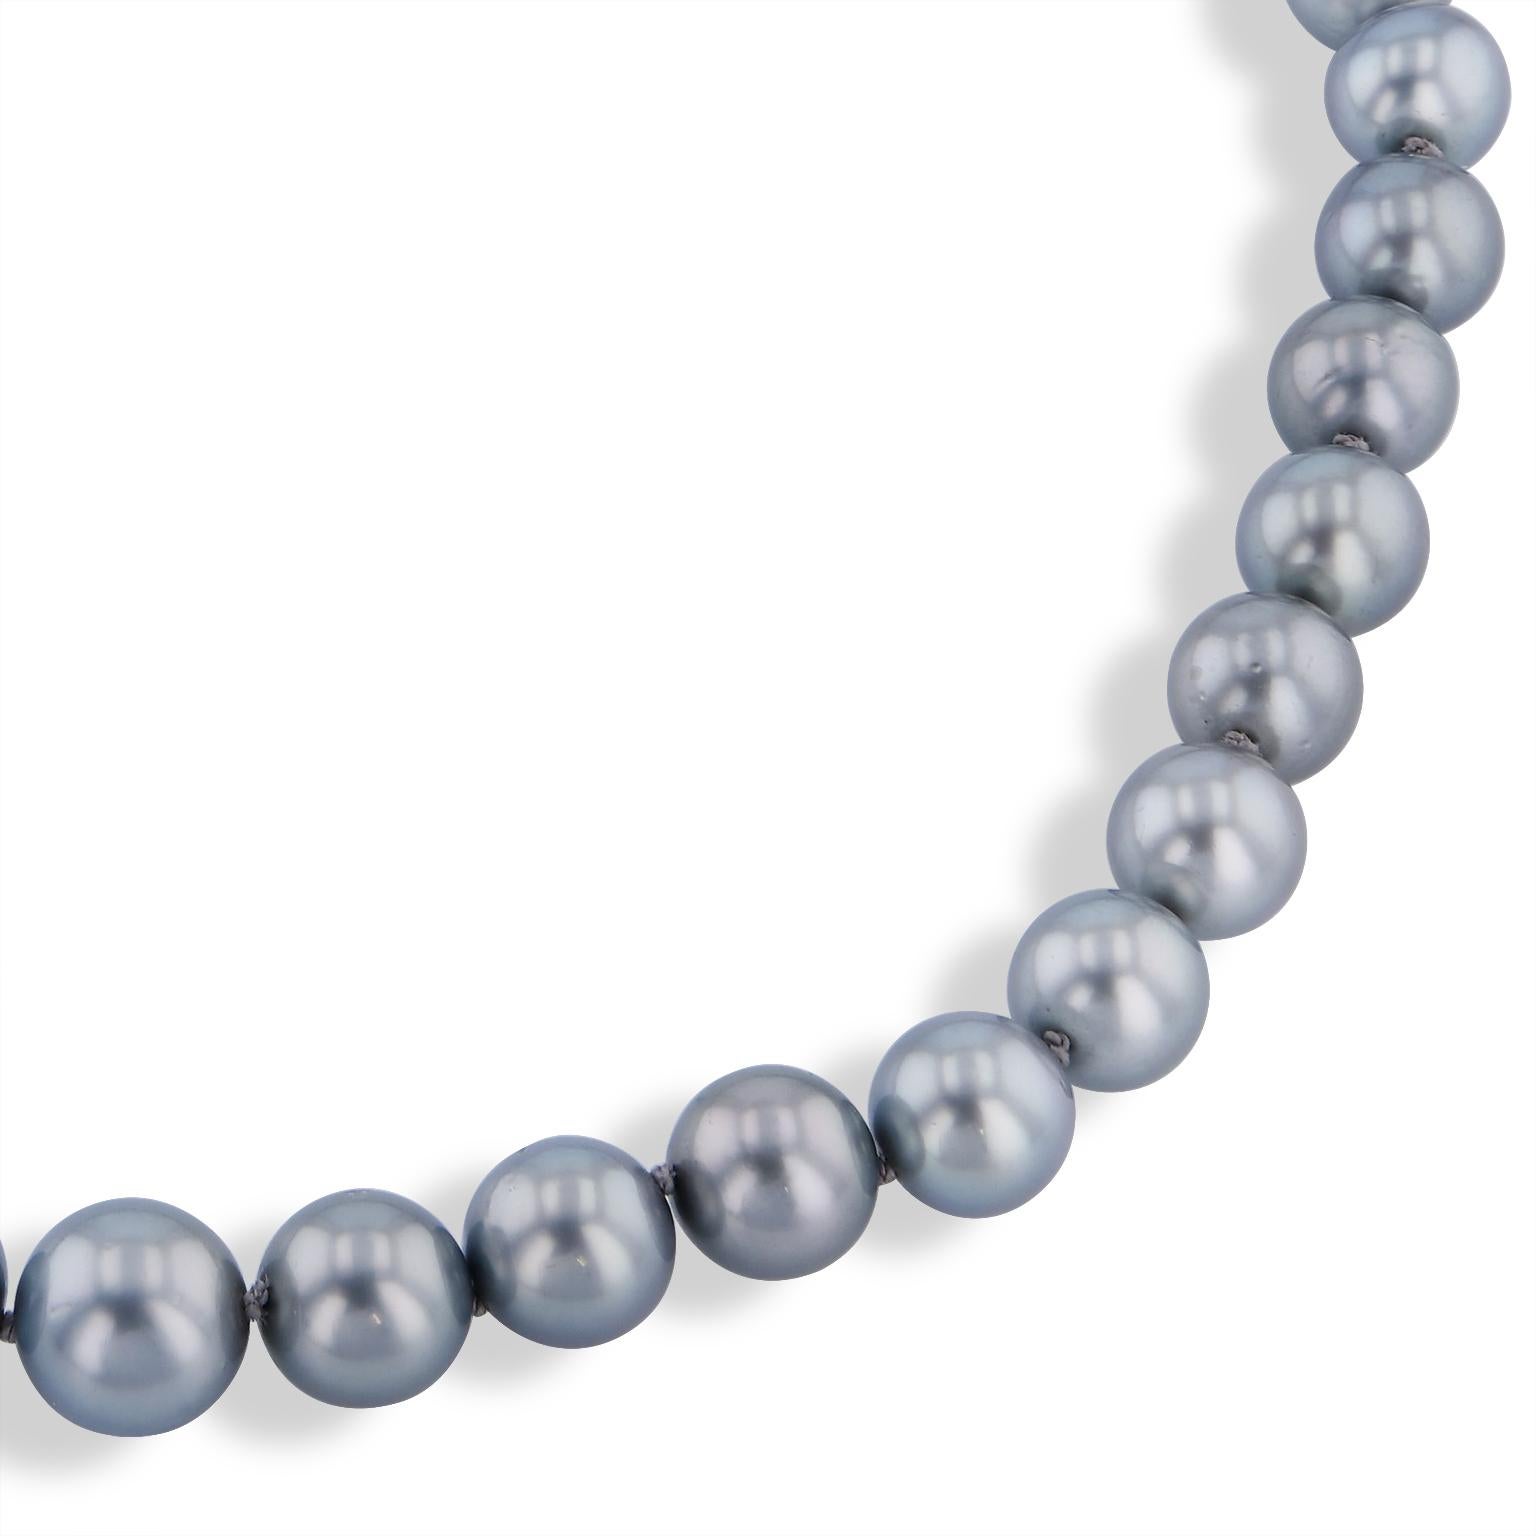 Forty-five Tahitian pearls measuring 8.6 – 11.65 millimeters are strung together to create this spectacular necklace. Elevating the impact of the piece are eighty-eight pave-set diamonds with a total weight of 0.75 carat (G/H/SI1) on the 18 karat